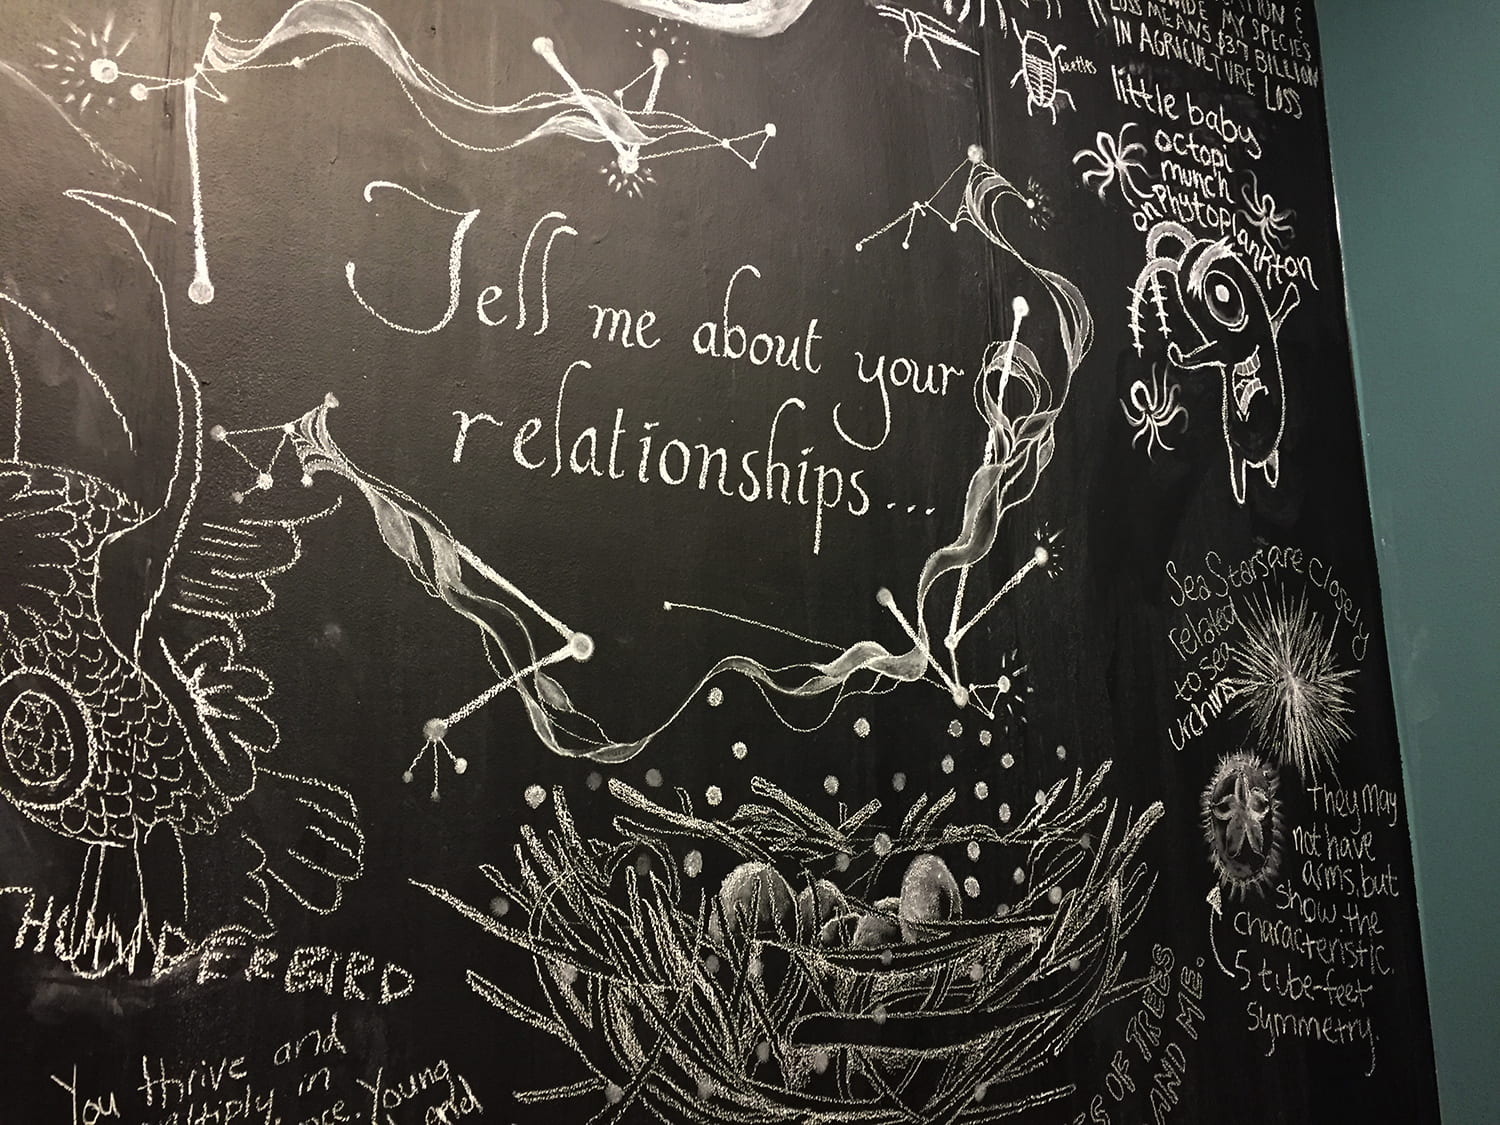 The words "Tell me about your relationships..." surrounded by labeled drawings on a chalkboard